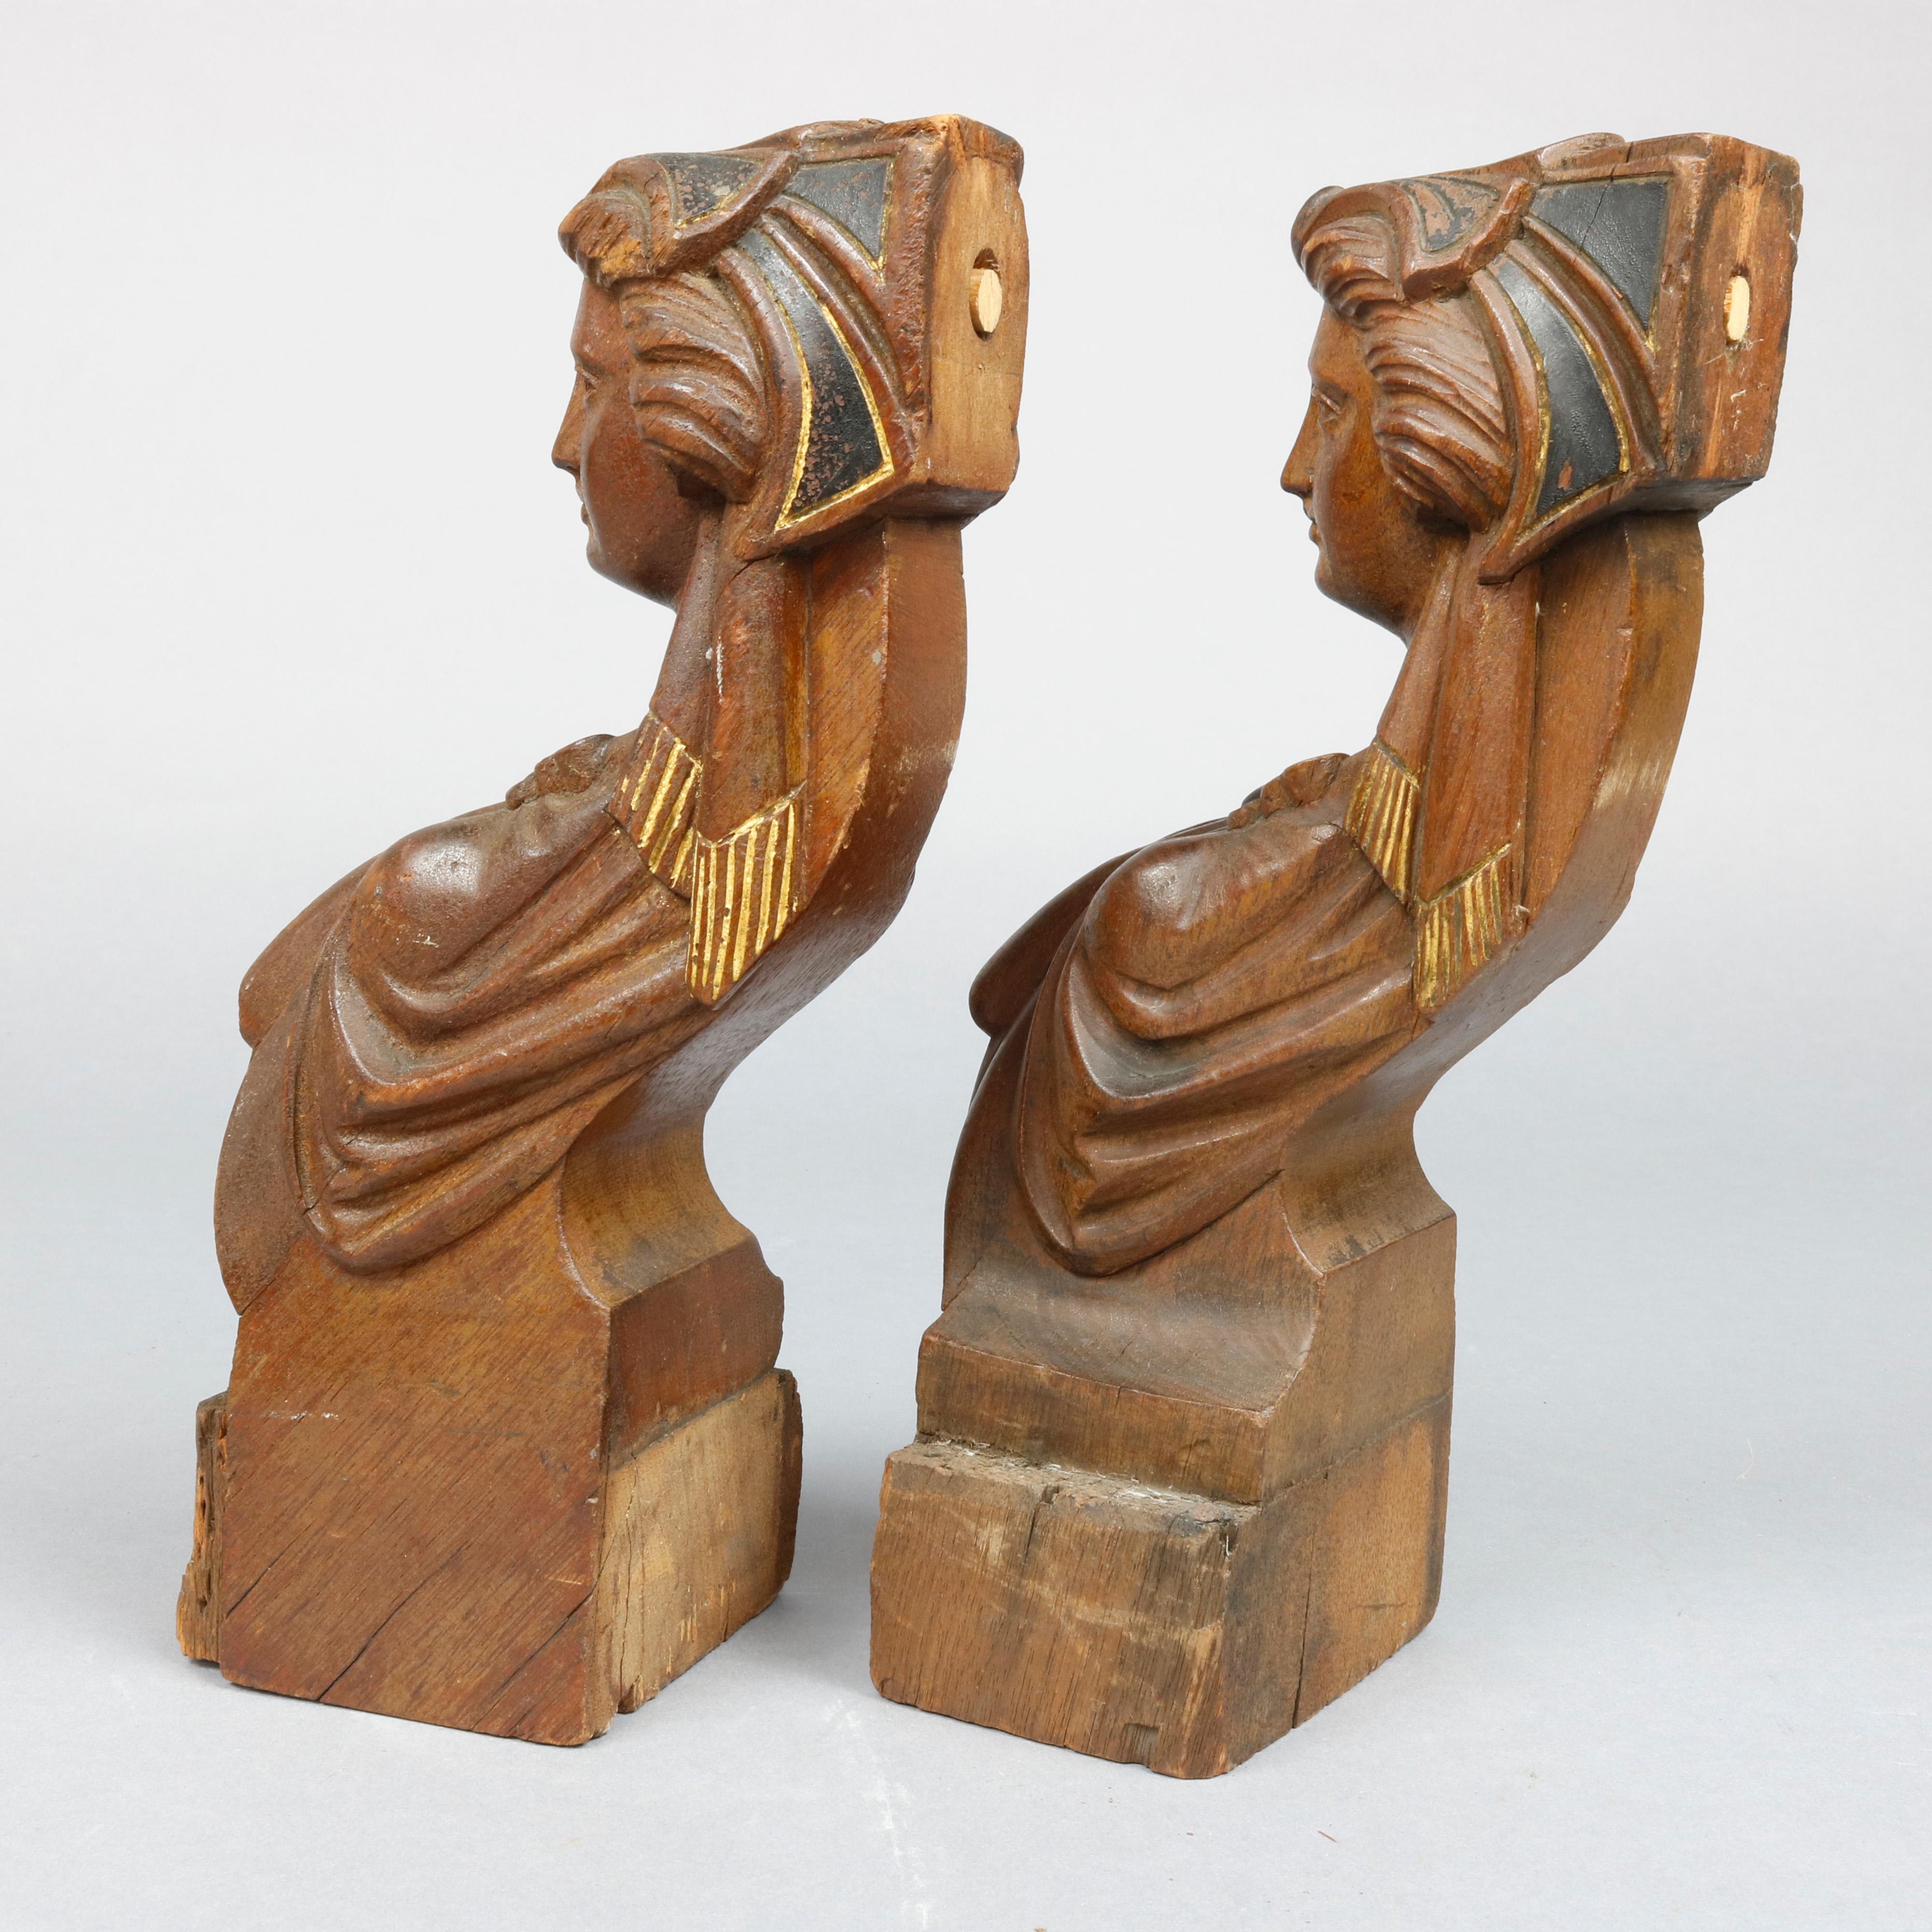 American Antique Pair of Carved Jelliff Walnut Woman Figure Architectural Elements